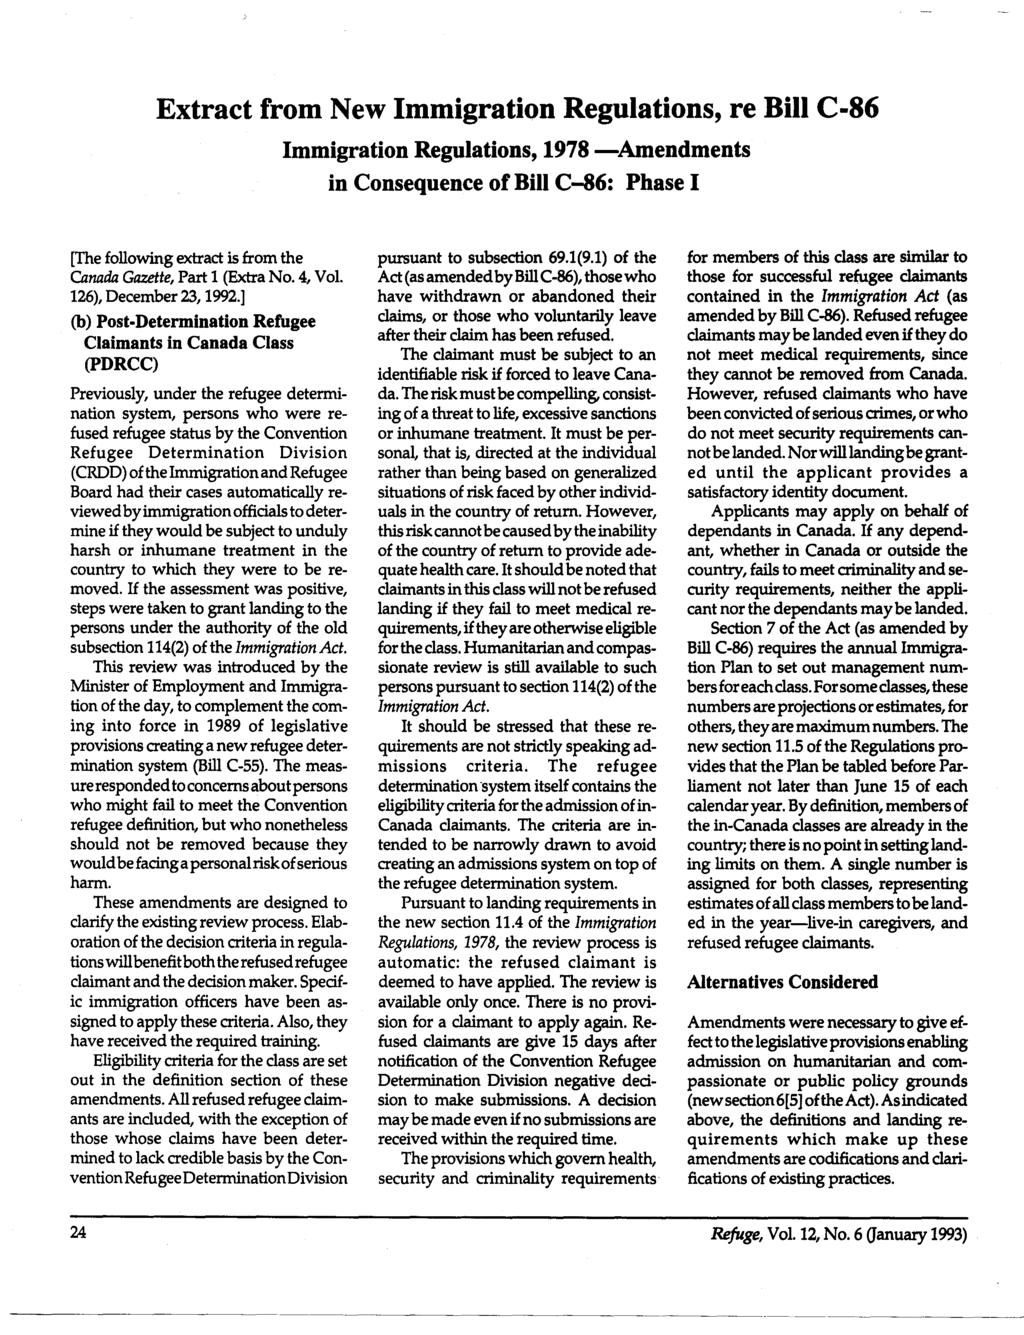 Extract from New Immigration Regulations, re Bill C-86 Immigration Regulations, 1978 -Amendments in Consequence of Bill C-86: Phase I [The following extract is from the Canada Gazette, Part 1 (Extra